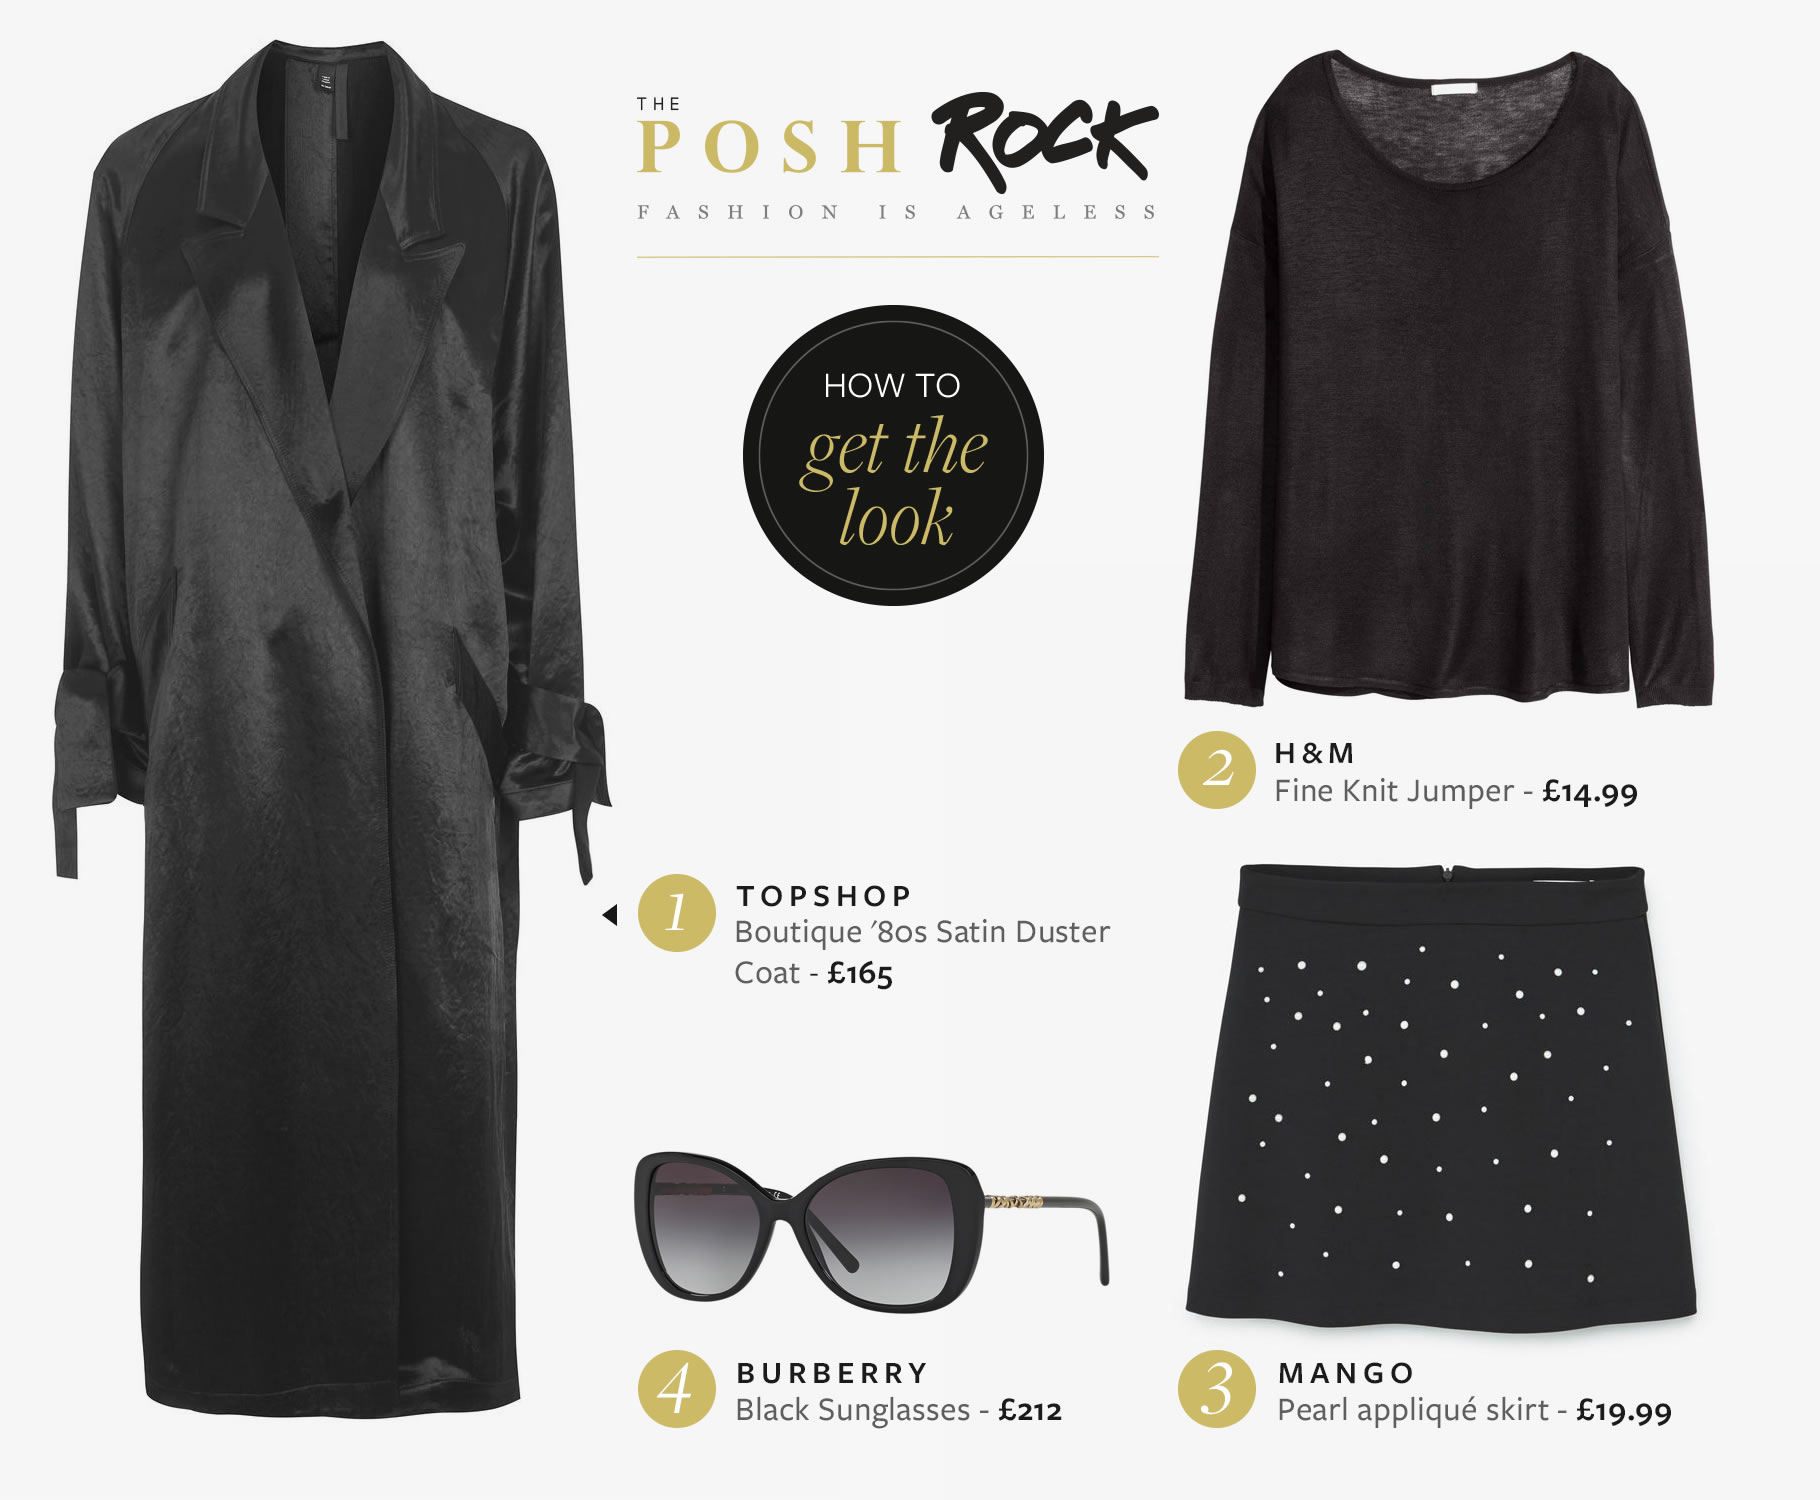 The Posh Rock - Get the look - knee high boots January 2017